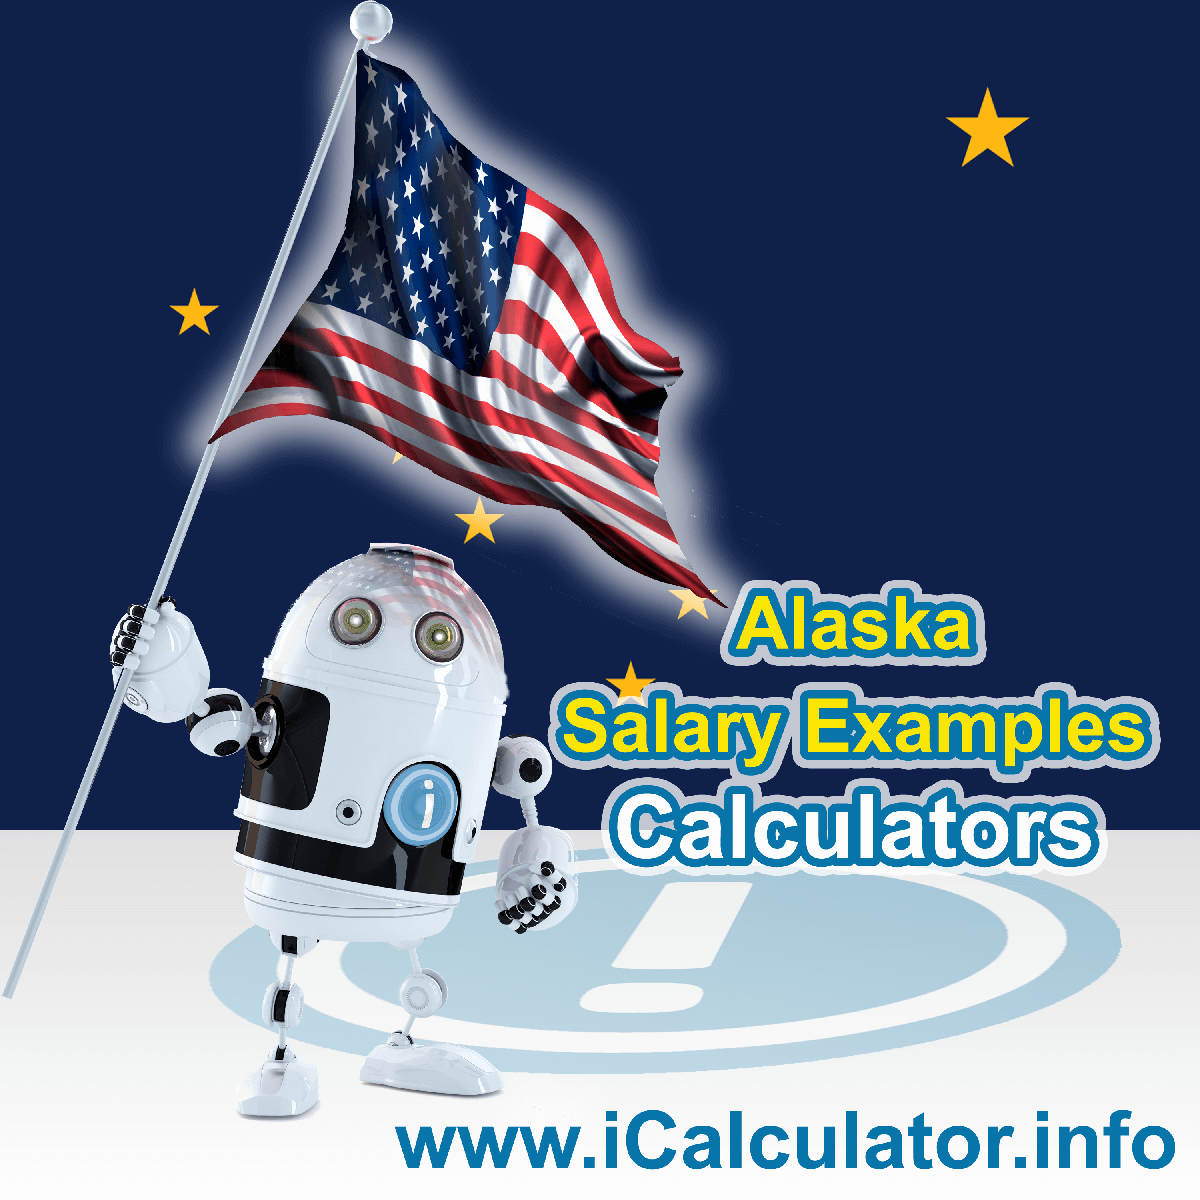 Alaska Salary Example for $ 120,000.00 in 2023 | iCalculator™ | $ 120,000.00 salary example for employee and employer paying Alaska State tincome taxes. Detailed salary after tax calculation including Alaska State Tax, Federal State Tax, Medicare Deductions, Social Security, Capital Gains and other income tax and salary deductions complete with supporting Alaska state tax tables 